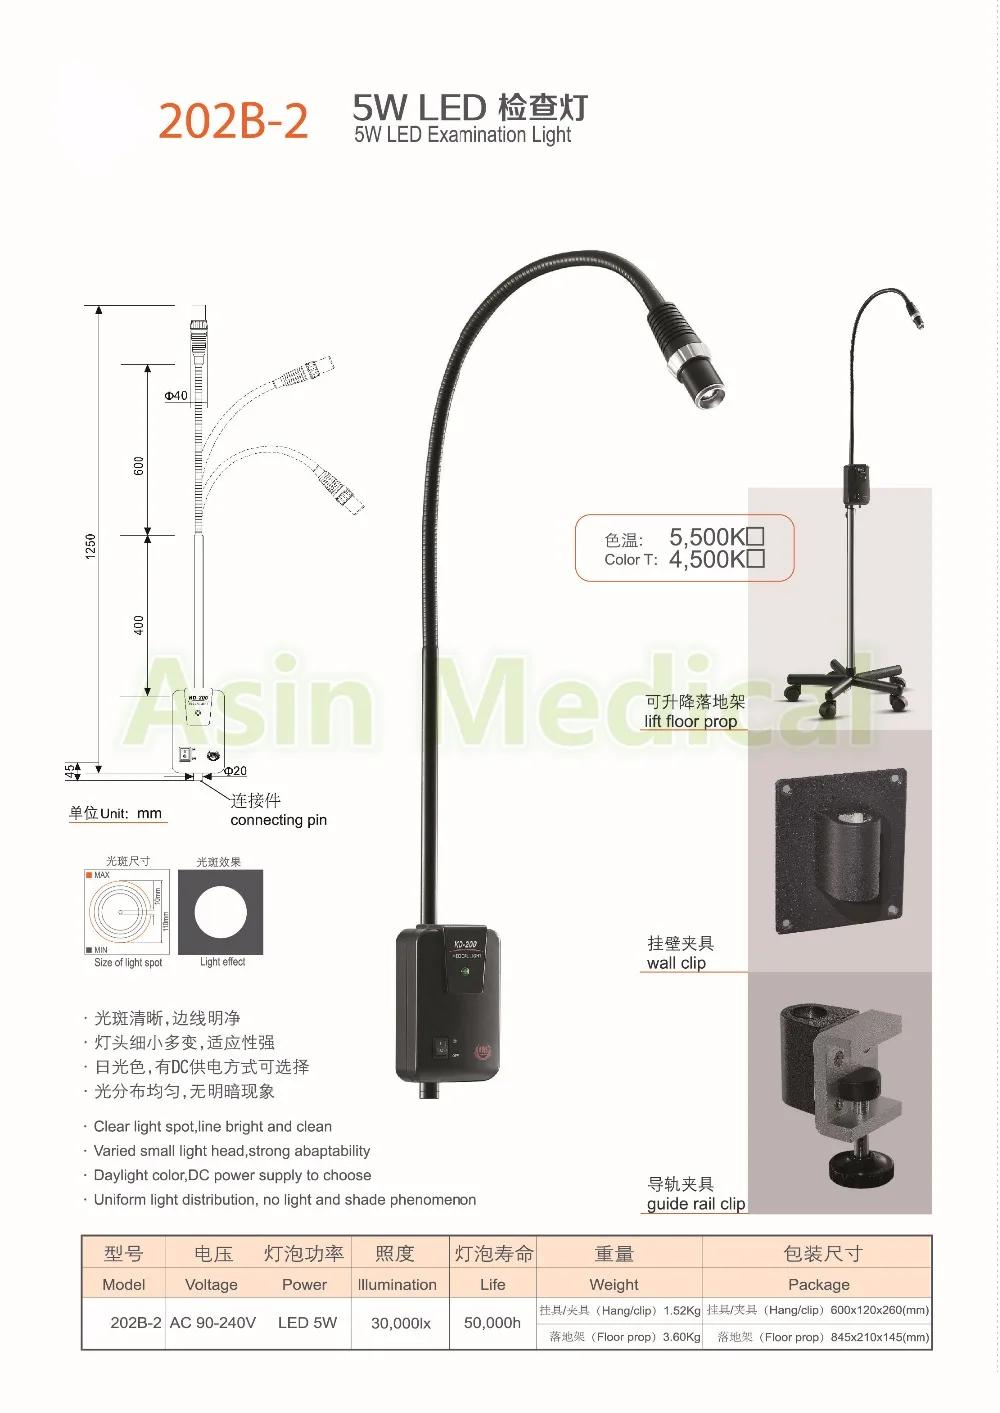 

New Arrival 5W LED Surgical Medical Exam Light Floor prop Examination Light CE FDA approval